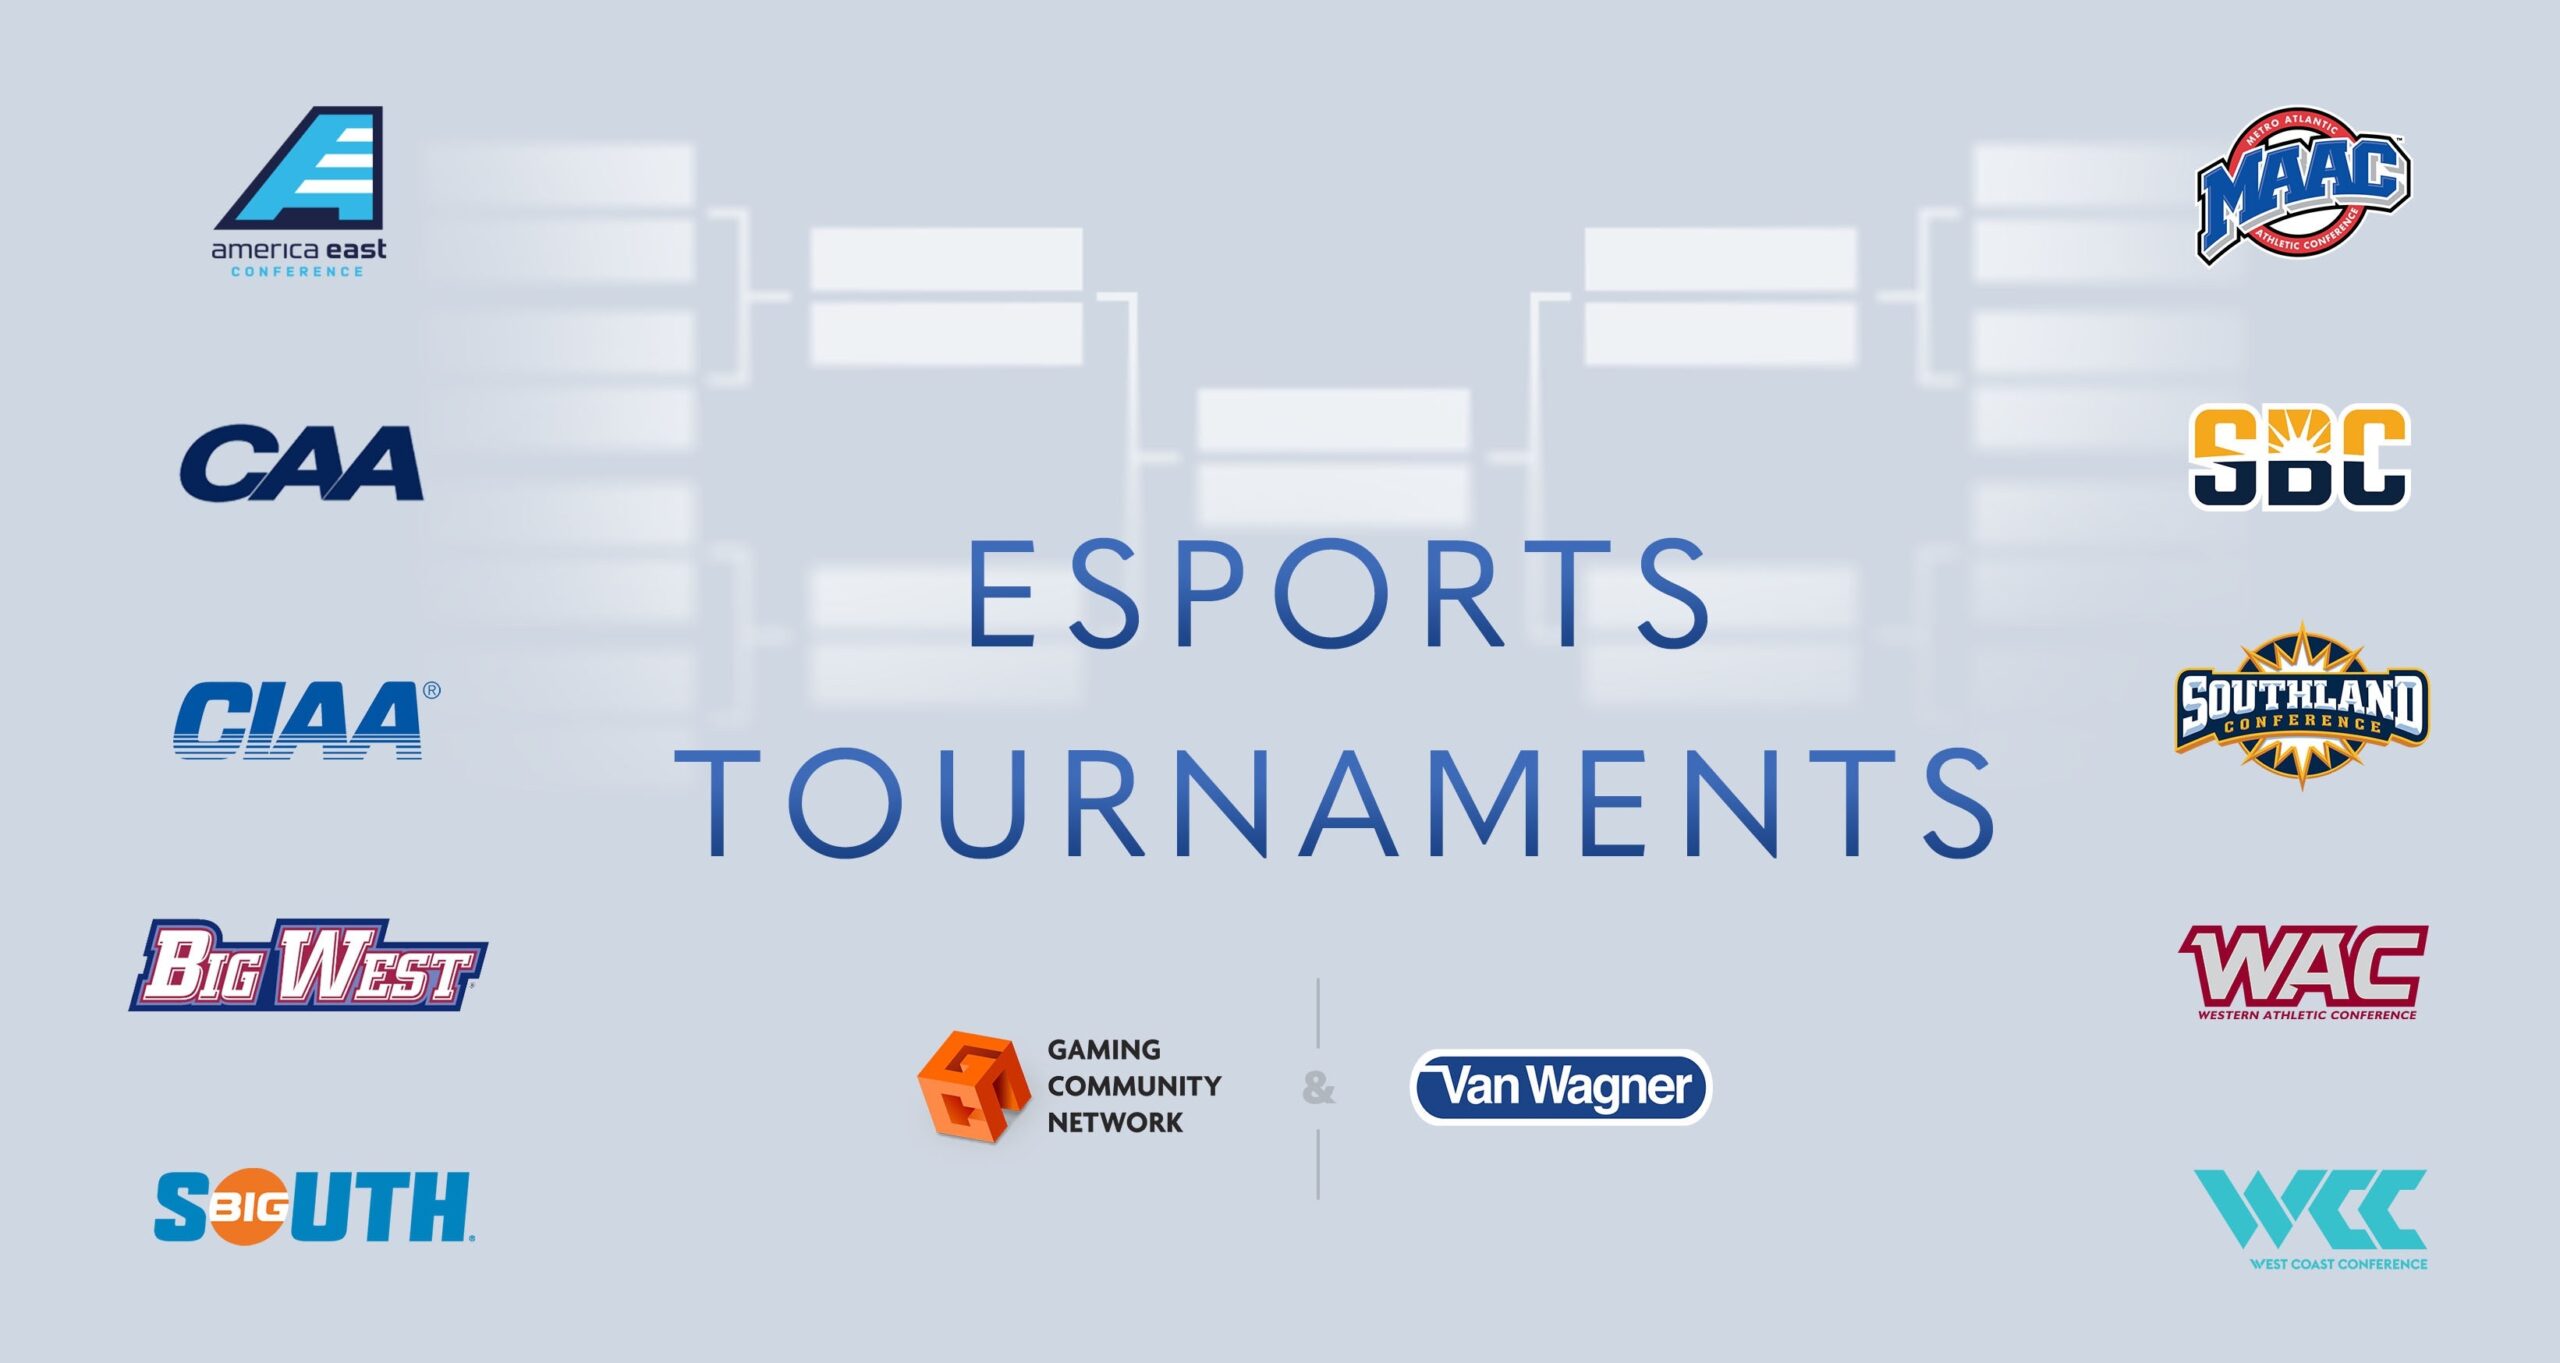 GCN, Van Wagner Level Up for Largest National Collegiate Esports Tournaments Across Multiple Gaming Titles featured image